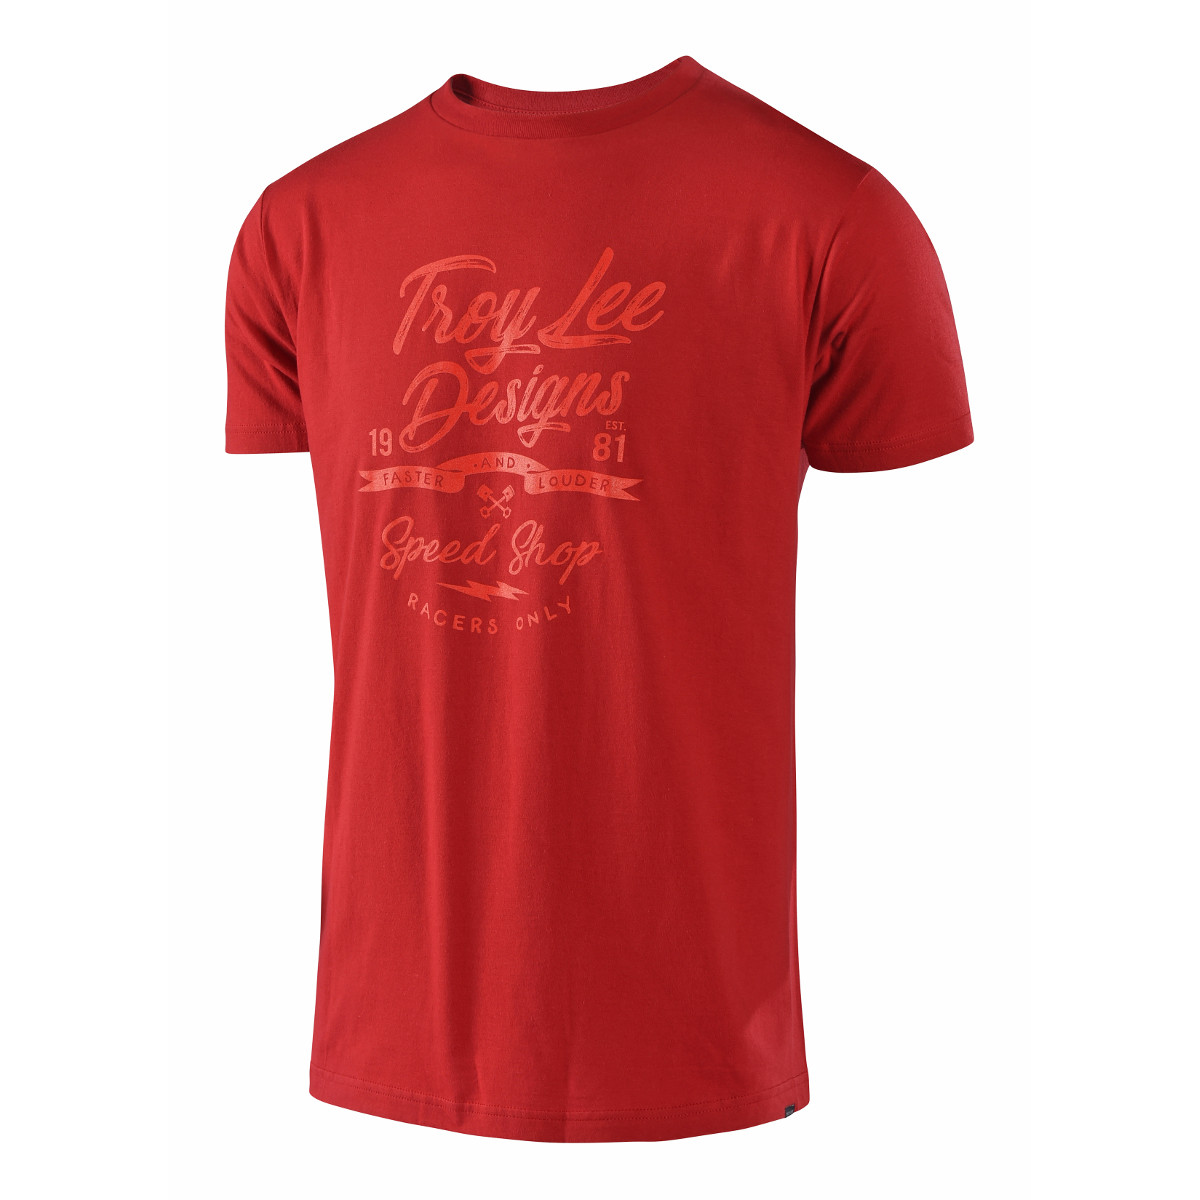 Troy Lee Designs T-Shirt Widow Maker Rosso Scuro